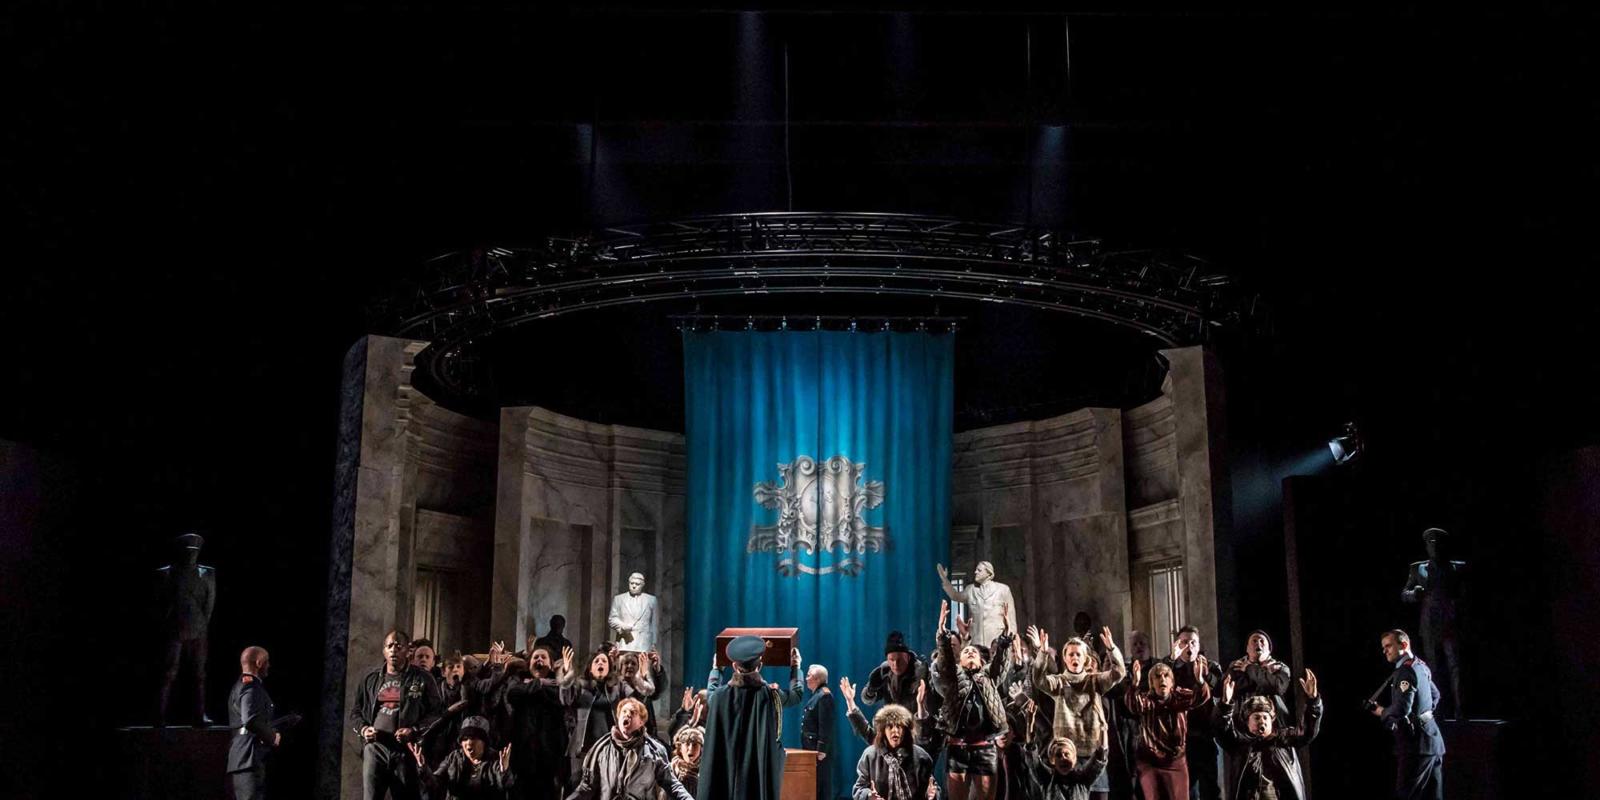 Group of people singing to the audience while a man holds a box in the air in ENO's The Winter's Tale